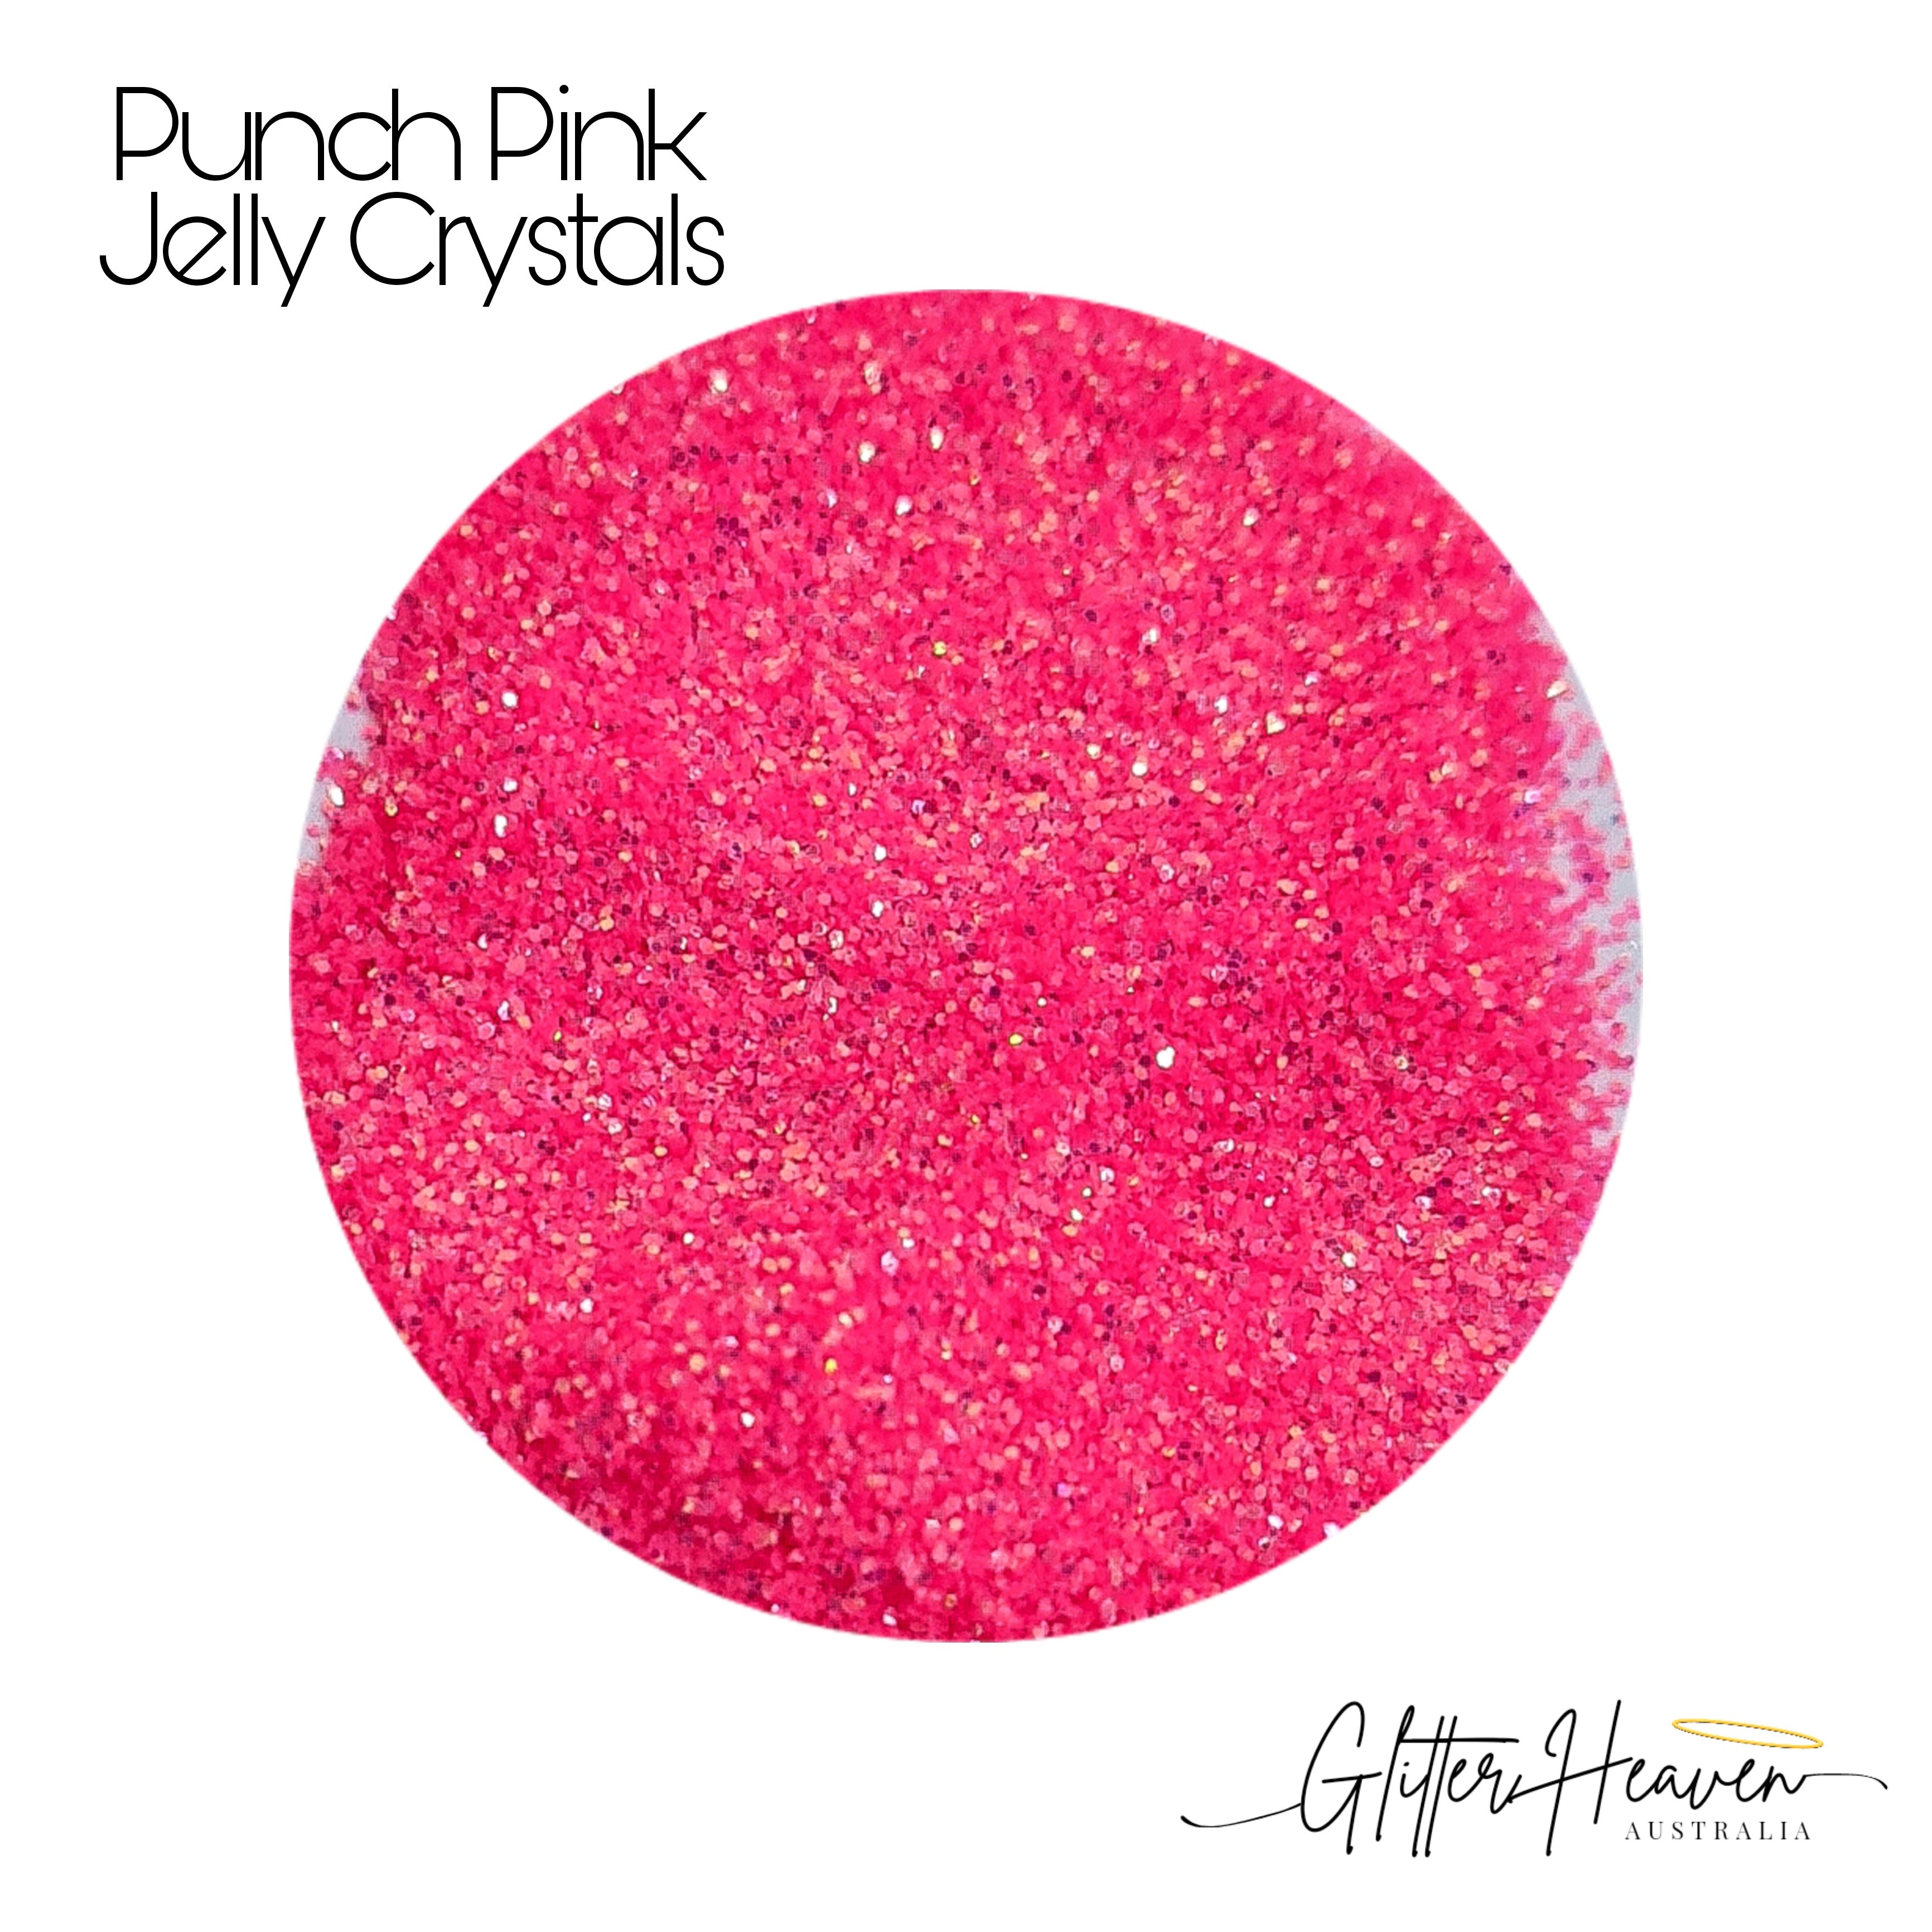 Punch Pink Jelly Crystals